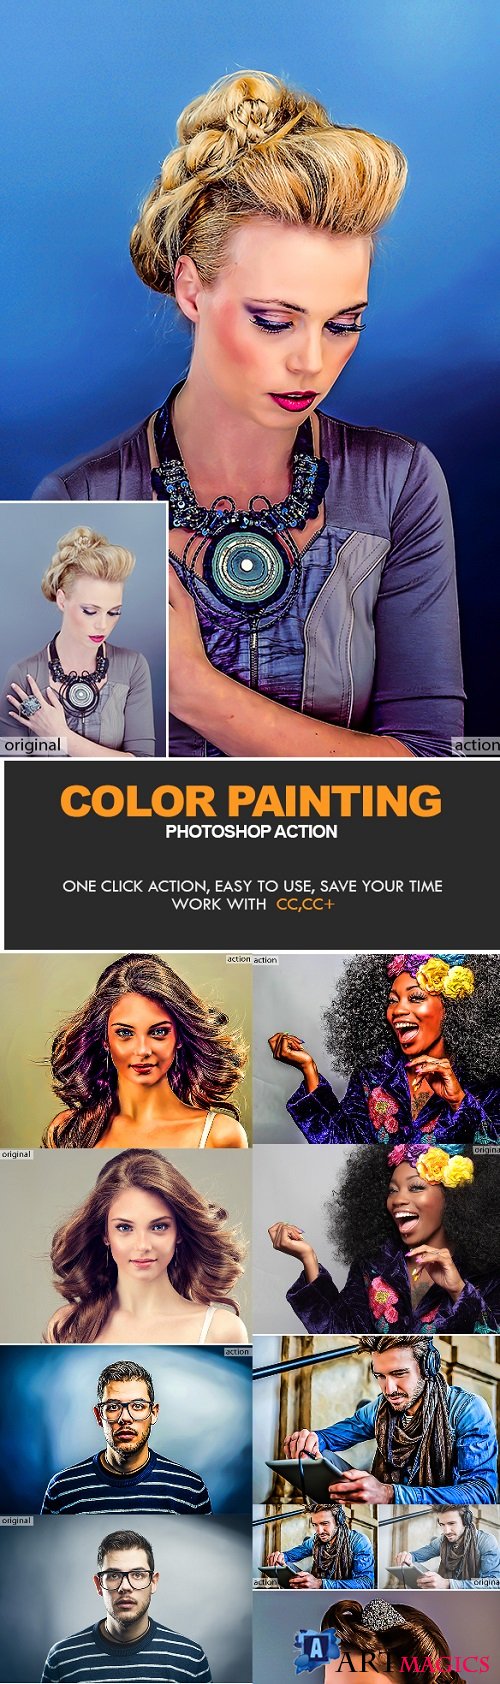 Color Painting Photoshop Action 21464006